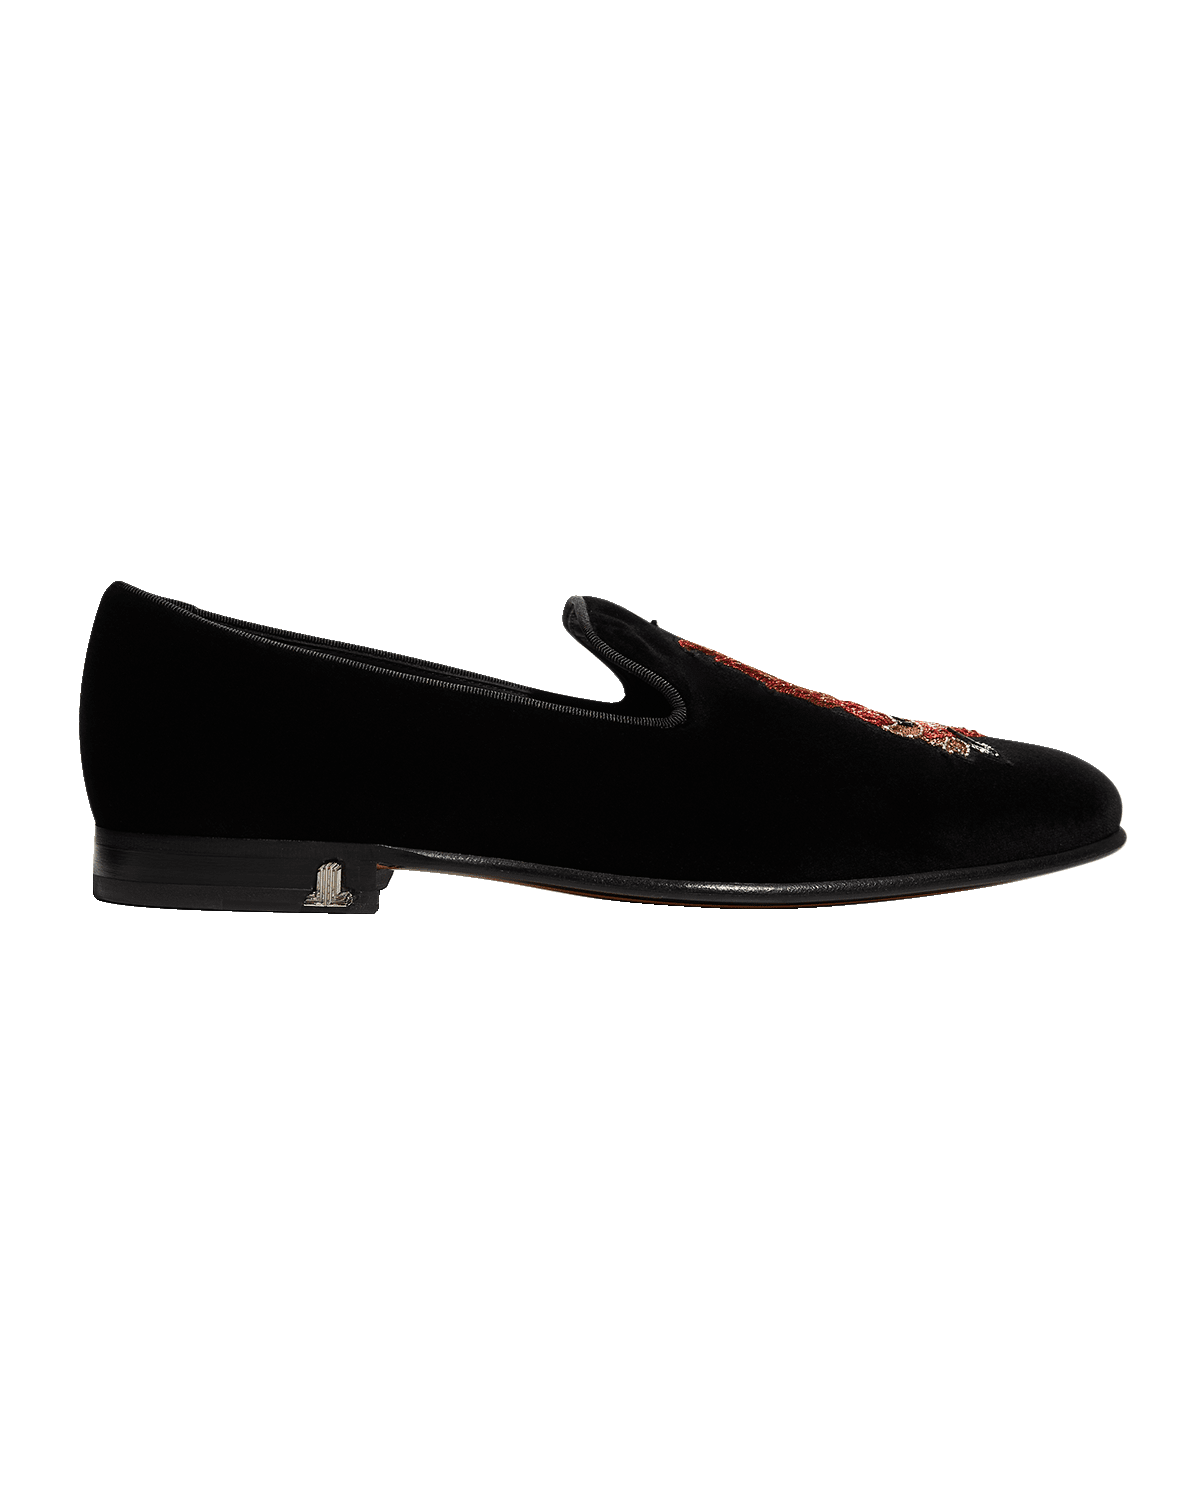 Christian Louboutin Men's Marquees Velvet Spike Red Sole Loafers 